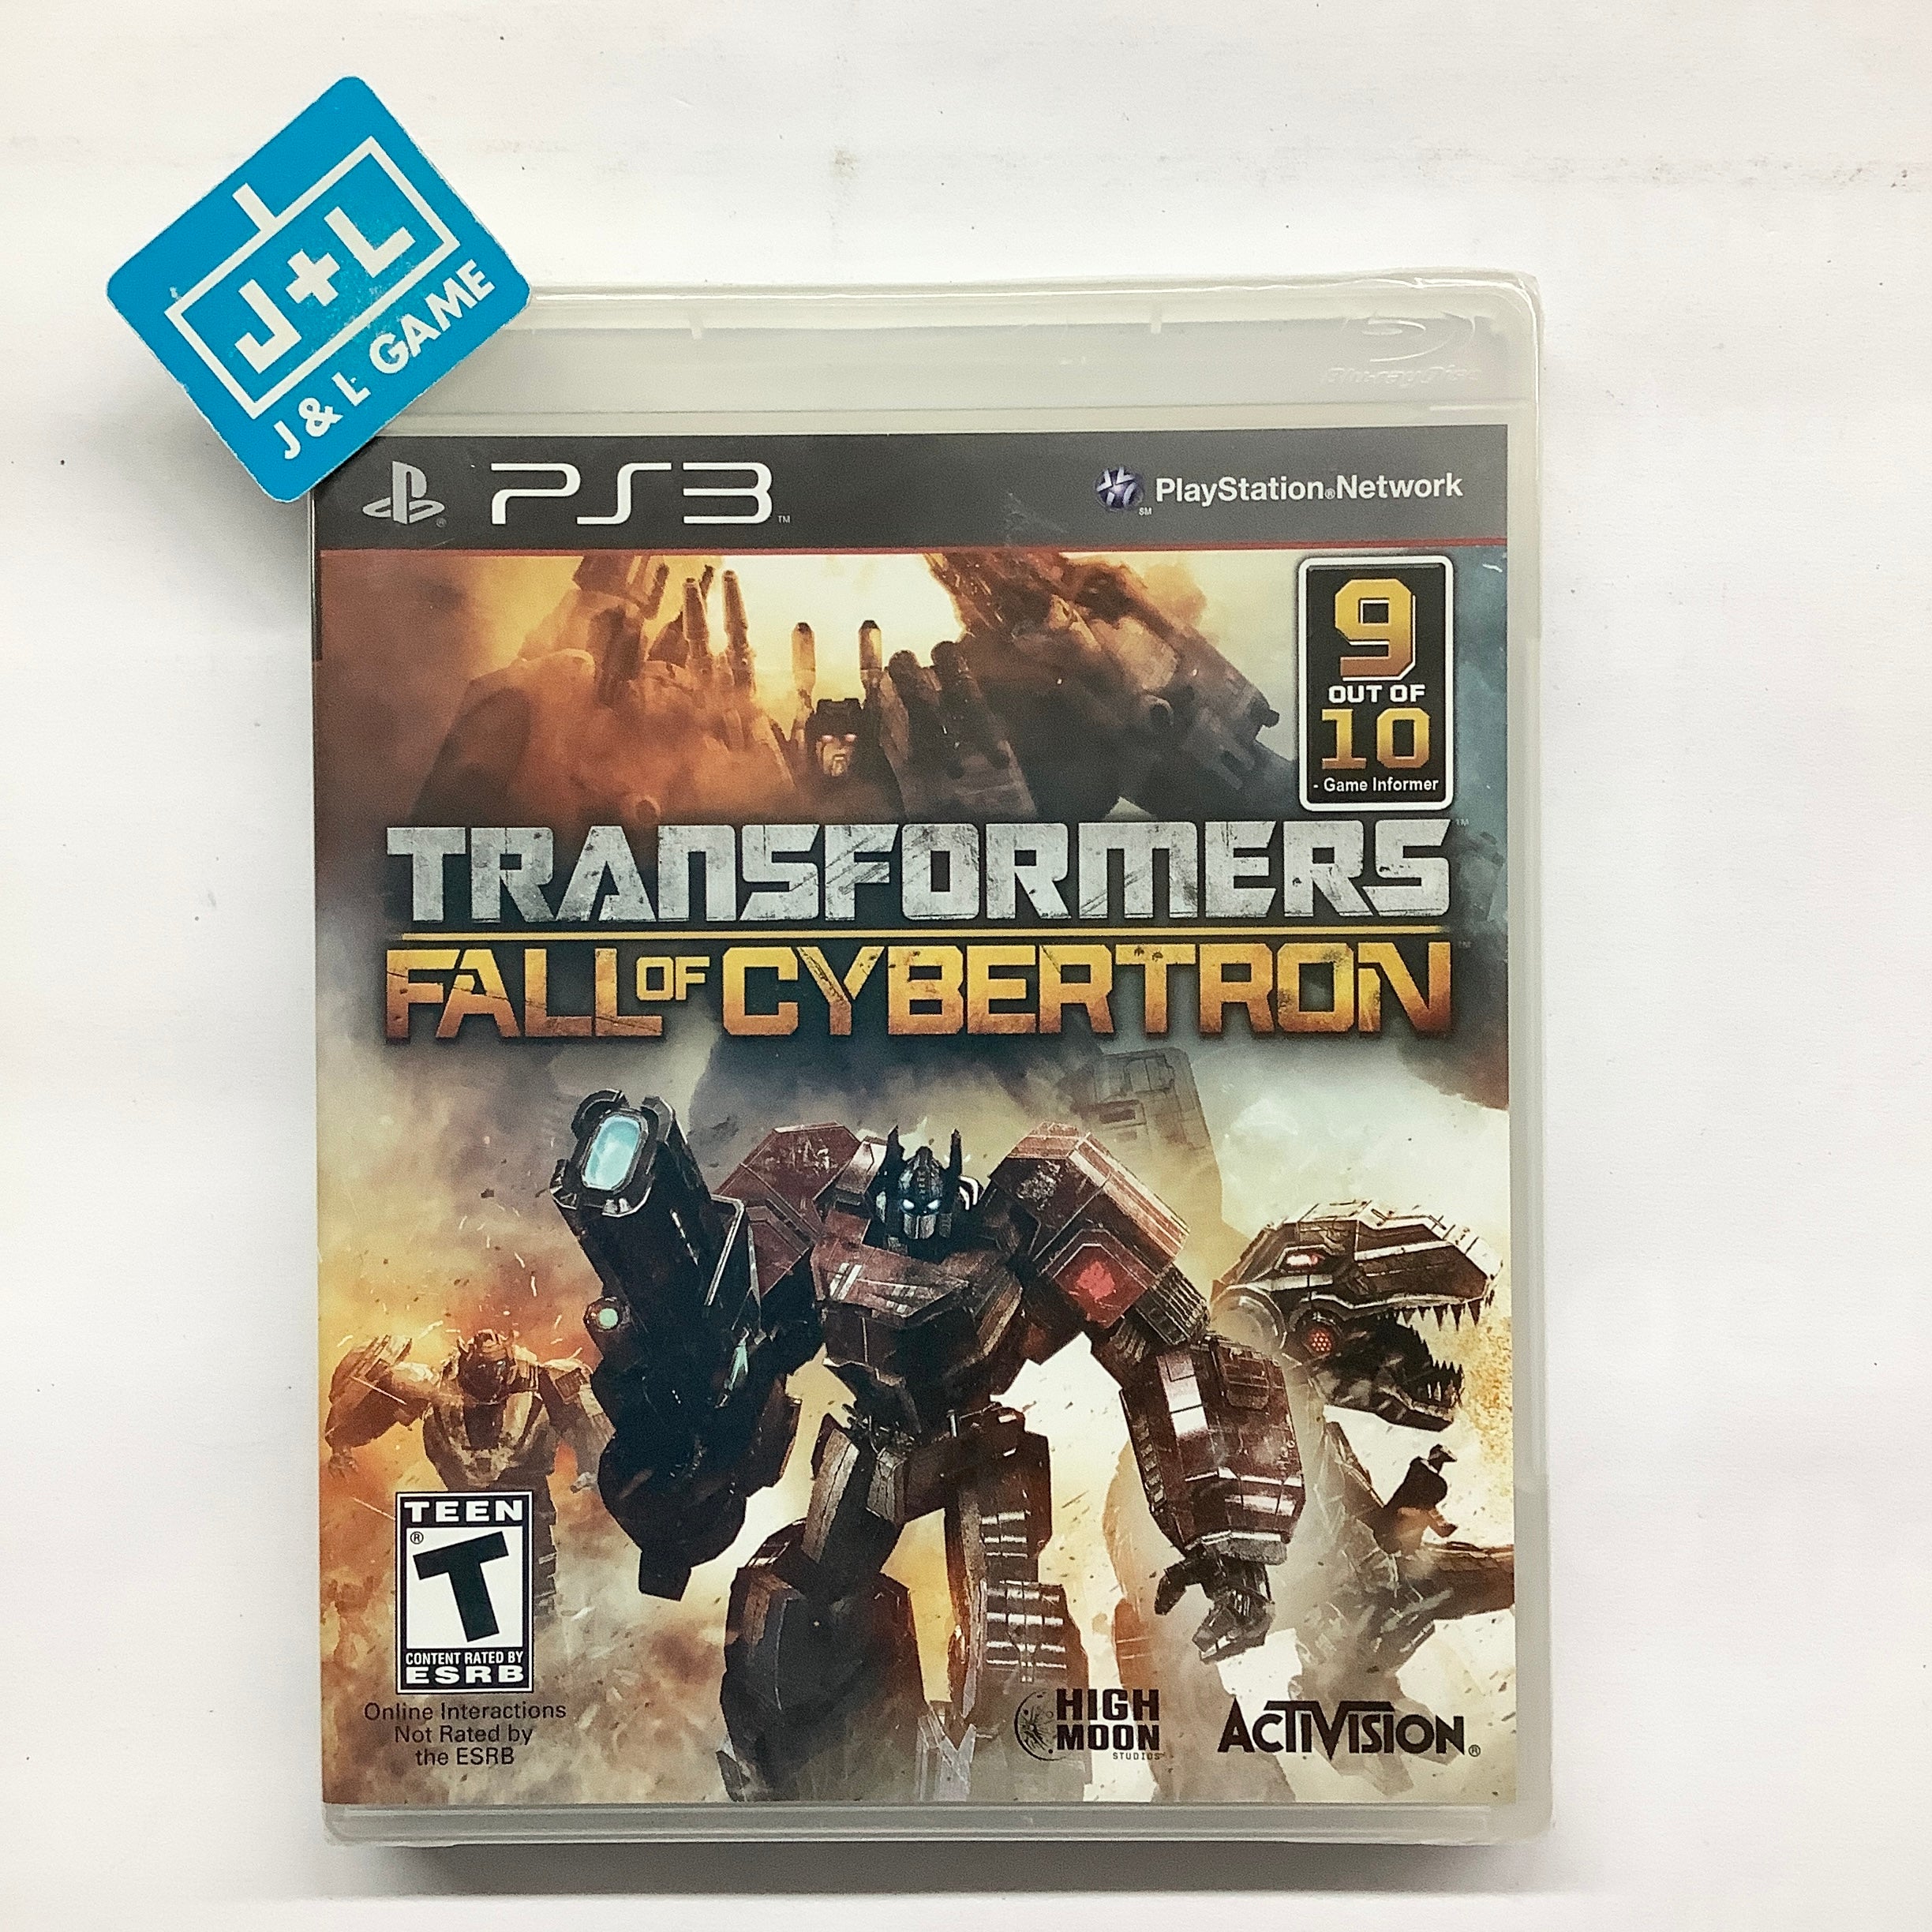 Transformers: Fall of Cybertron - (PS3) Playstation 3 Video Games ACTIVISION   